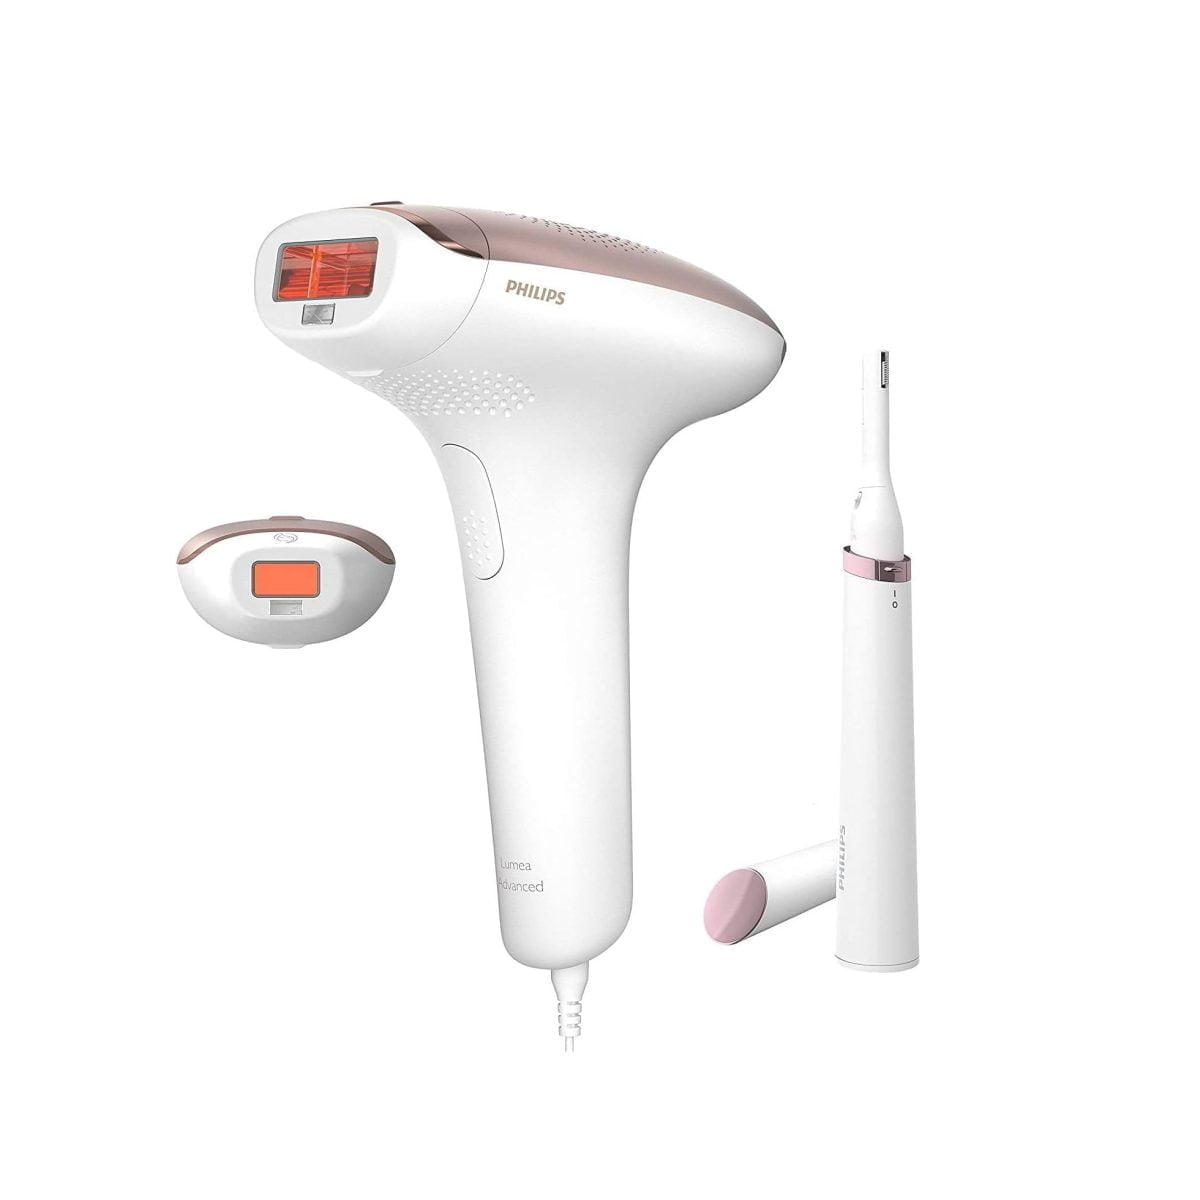 612Fwdavvil. Ac Sl1500 Philips &Amp;Lt;H1&Amp;Gt;Philips Ipl Hair Removal Lumea Advanced - Full Body And Face Bri921&Amp;Lt;/H1&Amp;Gt; The World’s First Ipl With Curved Attachments For Body And Face + Satin Compact Pen Trimmer &Amp;Lt;Ul Class=&Amp;Quot;P-Bullets&Amp;Quot;&Amp;Gt; &Amp;Lt;Li&Amp;Gt;Corded Only&Amp;Lt;/Li&Amp;Gt; &Amp;Lt;Li&Amp;Gt;Smartskin Sensor&Amp;Lt;/Li&Amp;Gt; &Amp;Lt;Li&Amp;Gt;Lumea Mobile App&Amp;Lt;/Li&Amp;Gt; &Amp;Lt;Li&Amp;Gt;5 Energy Settings&Amp;Lt;/Li&Amp;Gt; &Amp;Lt;/Ul&Amp;Gt; &Amp;Lt;H1&Amp;Gt;About The Product&Amp;Lt;/H1&Amp;Gt; &Amp;Lt;Ul Class=&Amp;Quot;A-Unordered-List A-Vertical A-Spacing-Mini&Amp;Quot;&Amp;Gt; &Amp;Lt;Li&Amp;Gt;&Amp;Lt;Span Class=&Amp;Quot;A-List-Item&Amp;Quot;&Amp;Gt;Expert Ipl Technology At Home, Developed With Dermatologists&Amp;Lt;/Span&Amp;Gt;&Amp;Lt;/Li&Amp;Gt; &Amp;Lt;Li&Amp;Gt;&Amp;Lt;Span Class=&Amp;Quot;A-List-Item&Amp;Quot;&Amp;Gt;Proven Safe And Effective Treatment&Amp;Lt;/Span&Amp;Gt;&Amp;Lt;/Li&Amp;Gt; &Amp;Lt;Li&Amp;Gt;&Amp;Lt;Span Class=&Amp;Quot;A-List-Item&Amp;Quot;&Amp;Gt;Suitable For A Wide Variety Of Hair And Skin Types&Amp;Lt;/Span&Amp;Gt;&Amp;Lt;/Li&Amp;Gt; &Amp;Lt;Li&Amp;Gt;&Amp;Lt;Span Class=&Amp;Quot;A-List-Item&Amp;Quot;&Amp;Gt;Safe And Effective Even On Sensitive Areas&Amp;Lt;/Span&Amp;Gt;&Amp;Lt;/Li&Amp;Gt; &Amp;Lt;Li&Amp;Gt;&Amp;Lt;Span Class=&Amp;Quot;A-List-Item&Amp;Quot;&Amp;Gt;Large Treatment Window For Fast Application&Amp;Lt;/Span&Amp;Gt;&Amp;Lt;/Li&Amp;Gt; &Amp;Lt;Li&Amp;Gt;&Amp;Lt;Span Class=&Amp;Quot;A-List-Item&Amp;Quot;&Amp;Gt;Free Lumea App For A Personal Coach At Your Fingertips&Amp;Lt;/Span&Amp;Gt;&Amp;Lt;/Li&Amp;Gt; &Amp;Lt;Li&Amp;Gt;&Amp;Lt;Span Class=&Amp;Quot;A-List-Item&Amp;Quot;&Amp;Gt;Precision Attachment For Extra Safety On The Face&Amp;Lt;/Span&Amp;Gt;&Amp;Lt;/Li&Amp;Gt; &Amp;Lt;/Ul&Amp;Gt; Philips Ipl Hair Removal Philips Ipl Hair Removal Lumea Advanced - Bri921